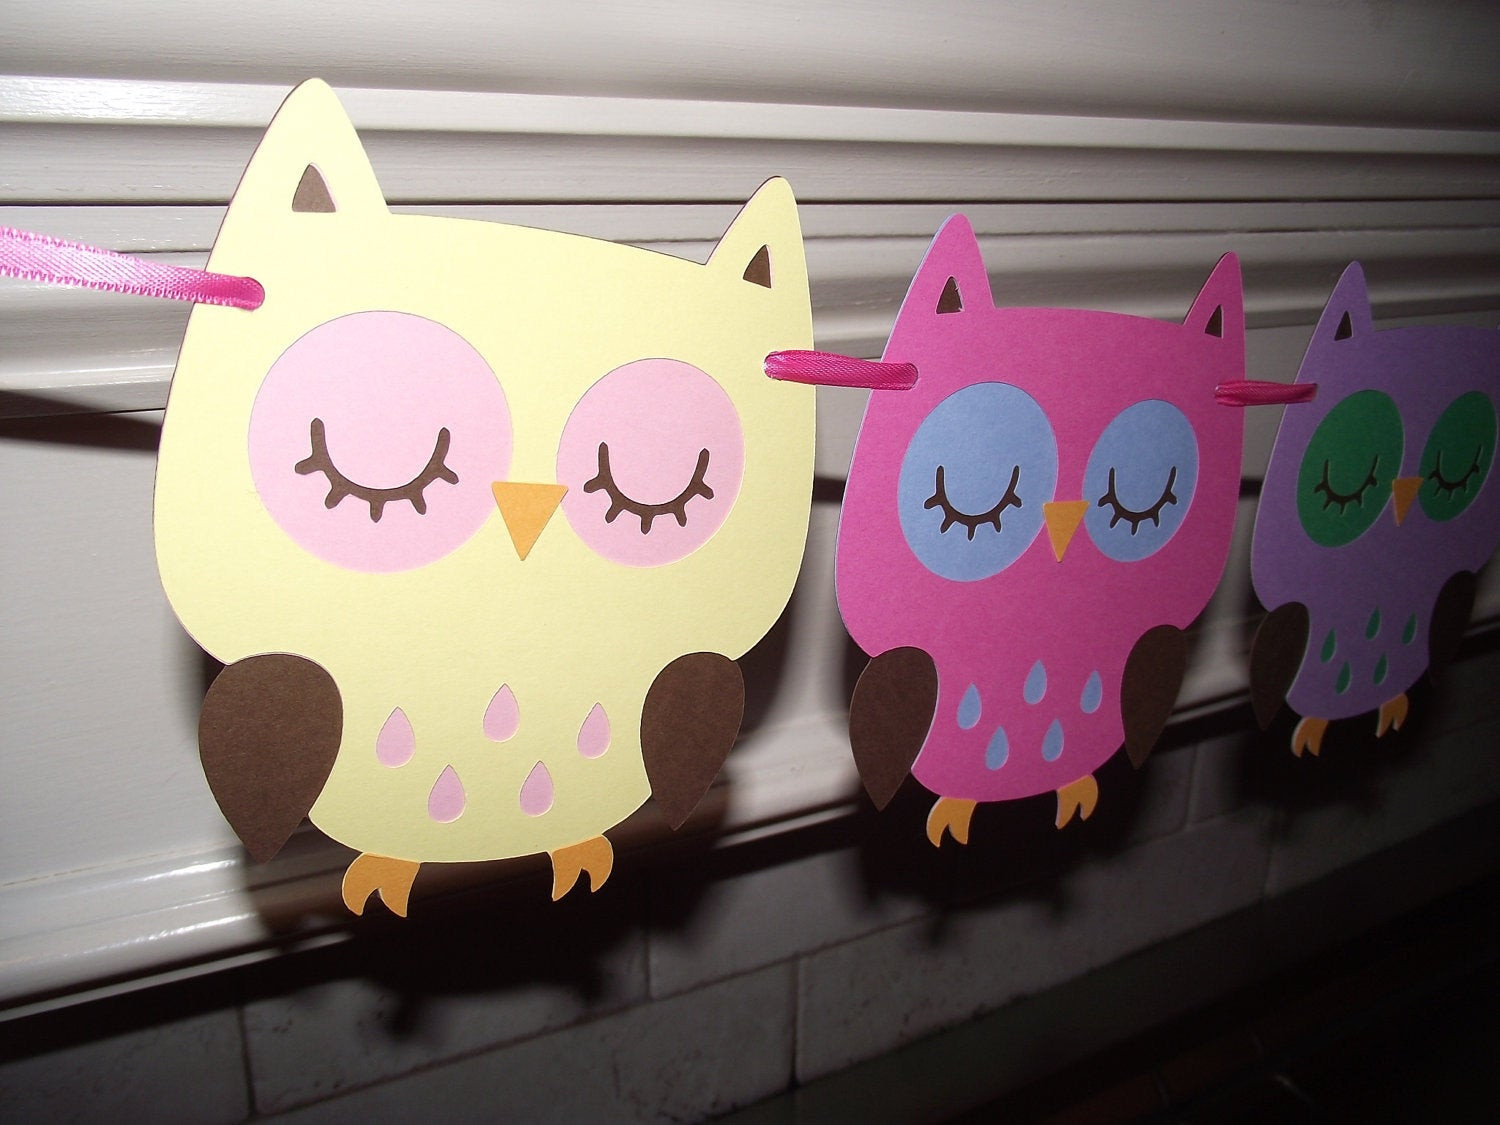 Baby Owls Decor
 Owl Decorations For Baby Shower